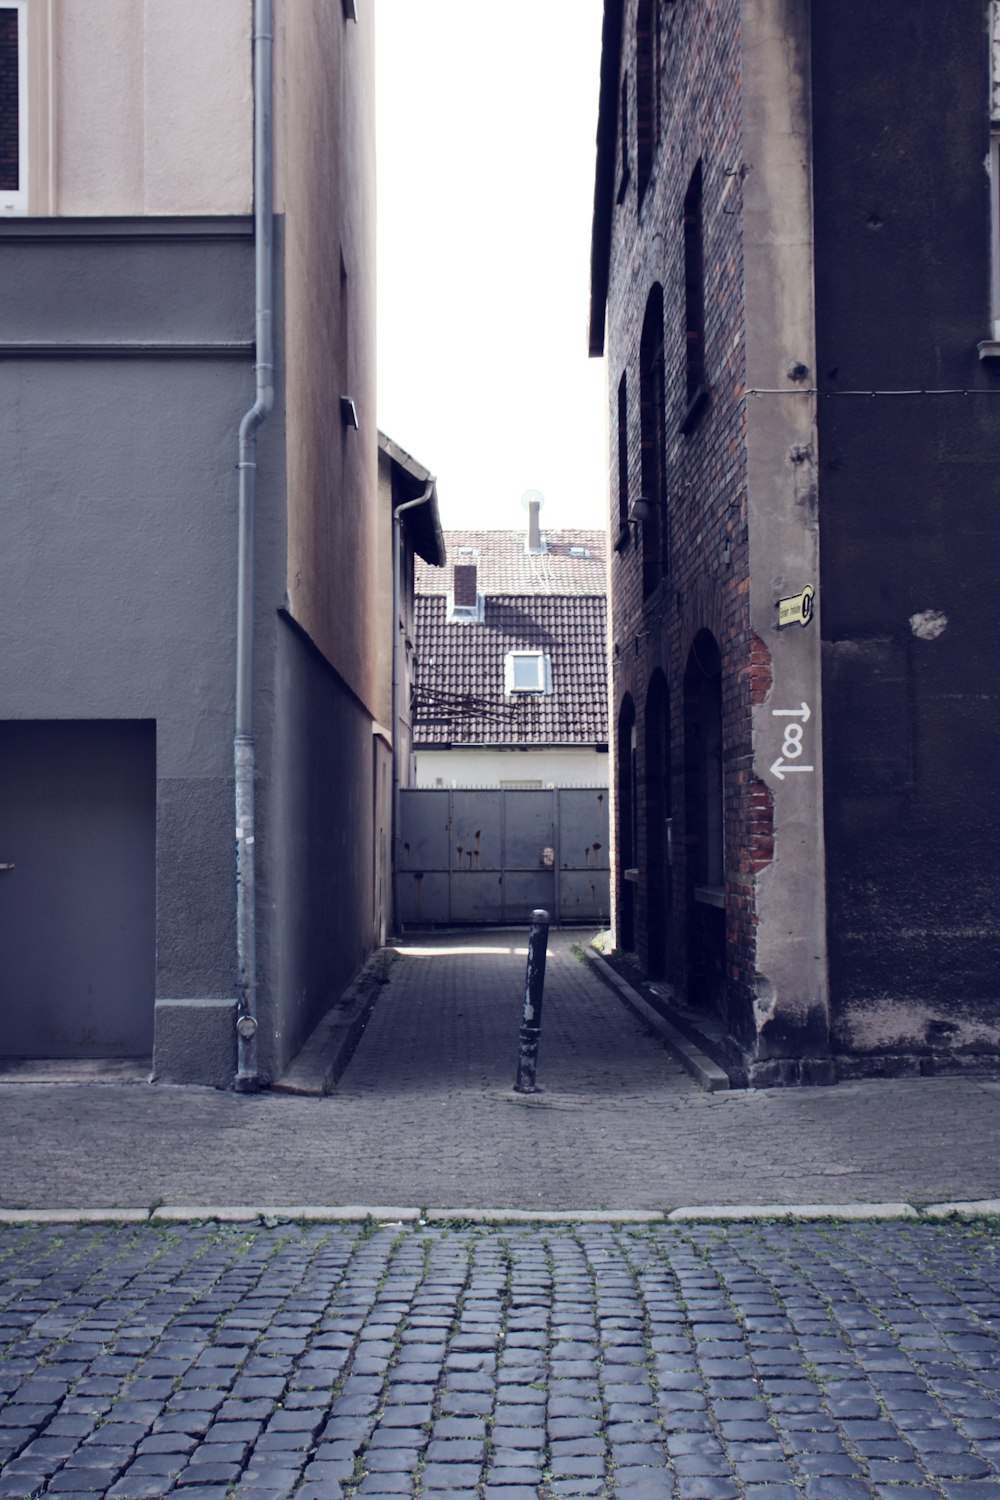 a narrow alley way with a person standing in the middle